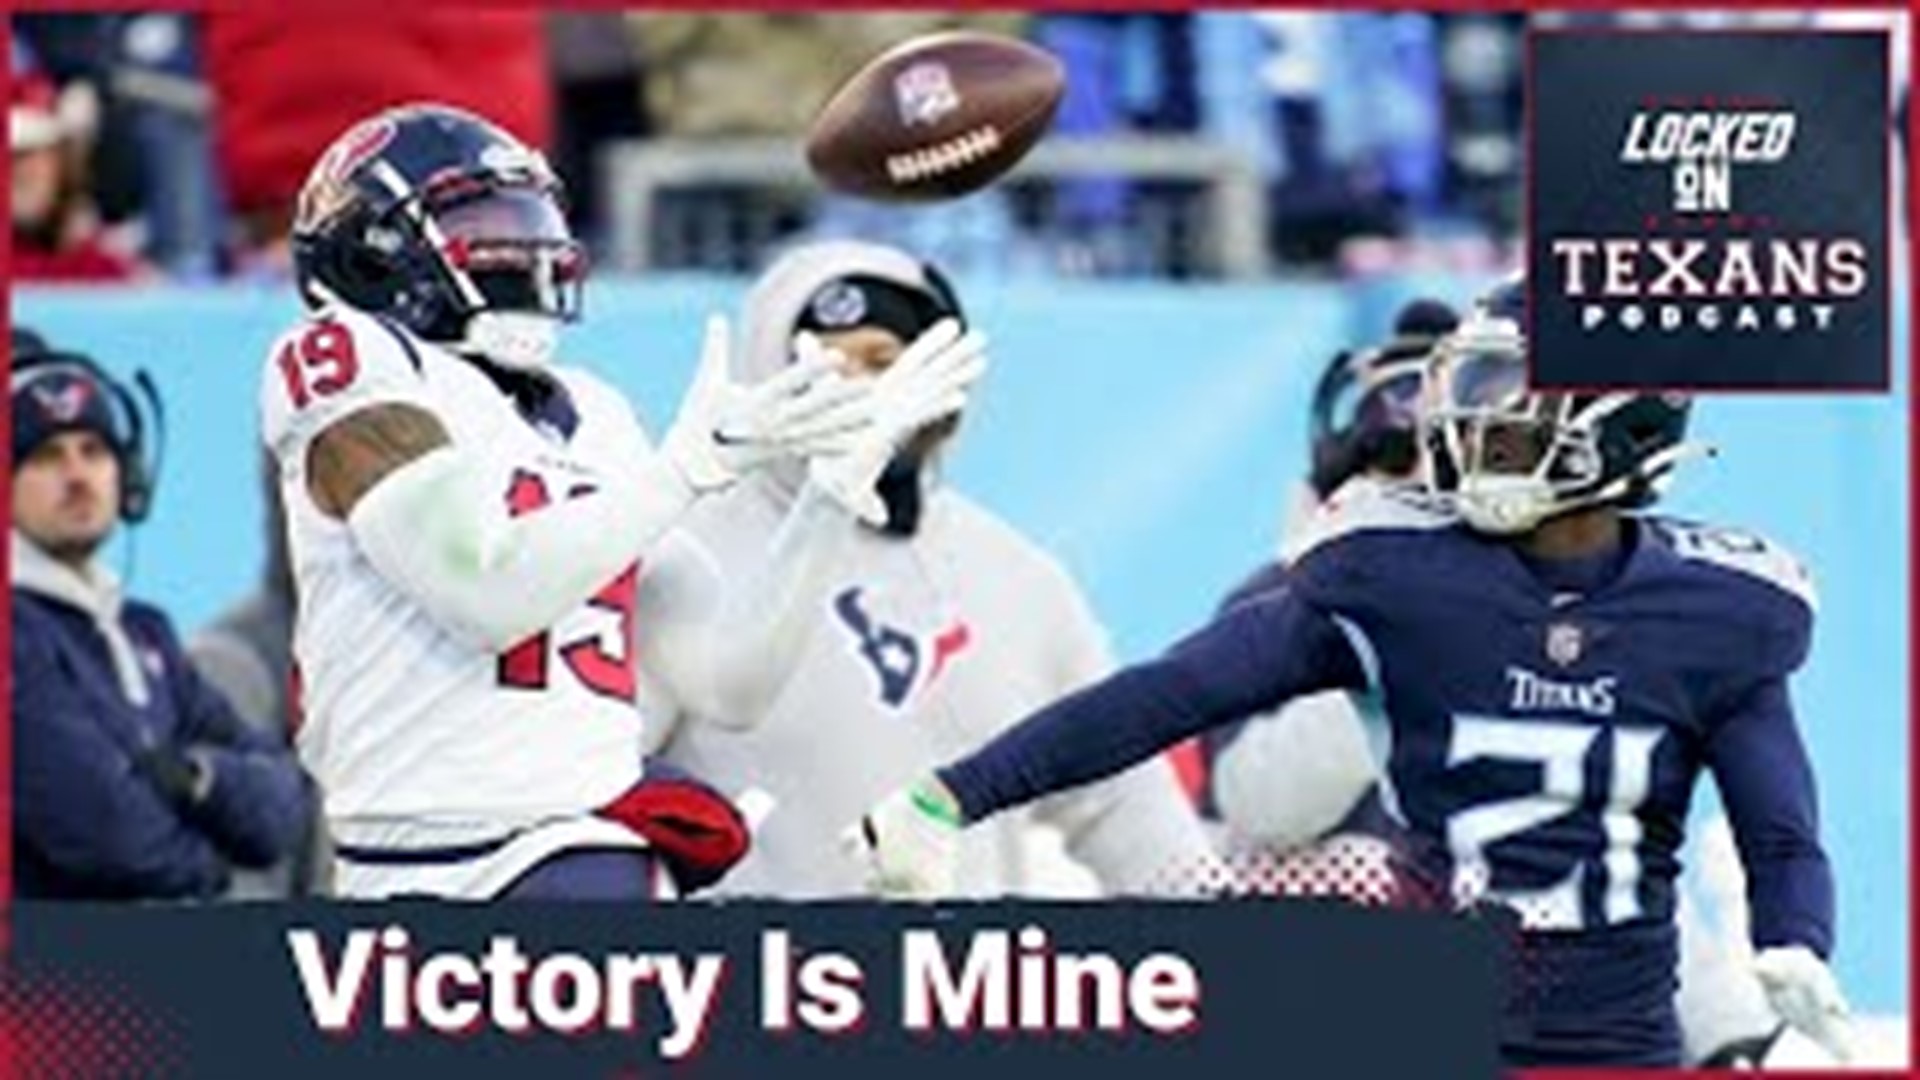 Recapping the Houston Texans 19-14 victory over the Titans on Saturday.